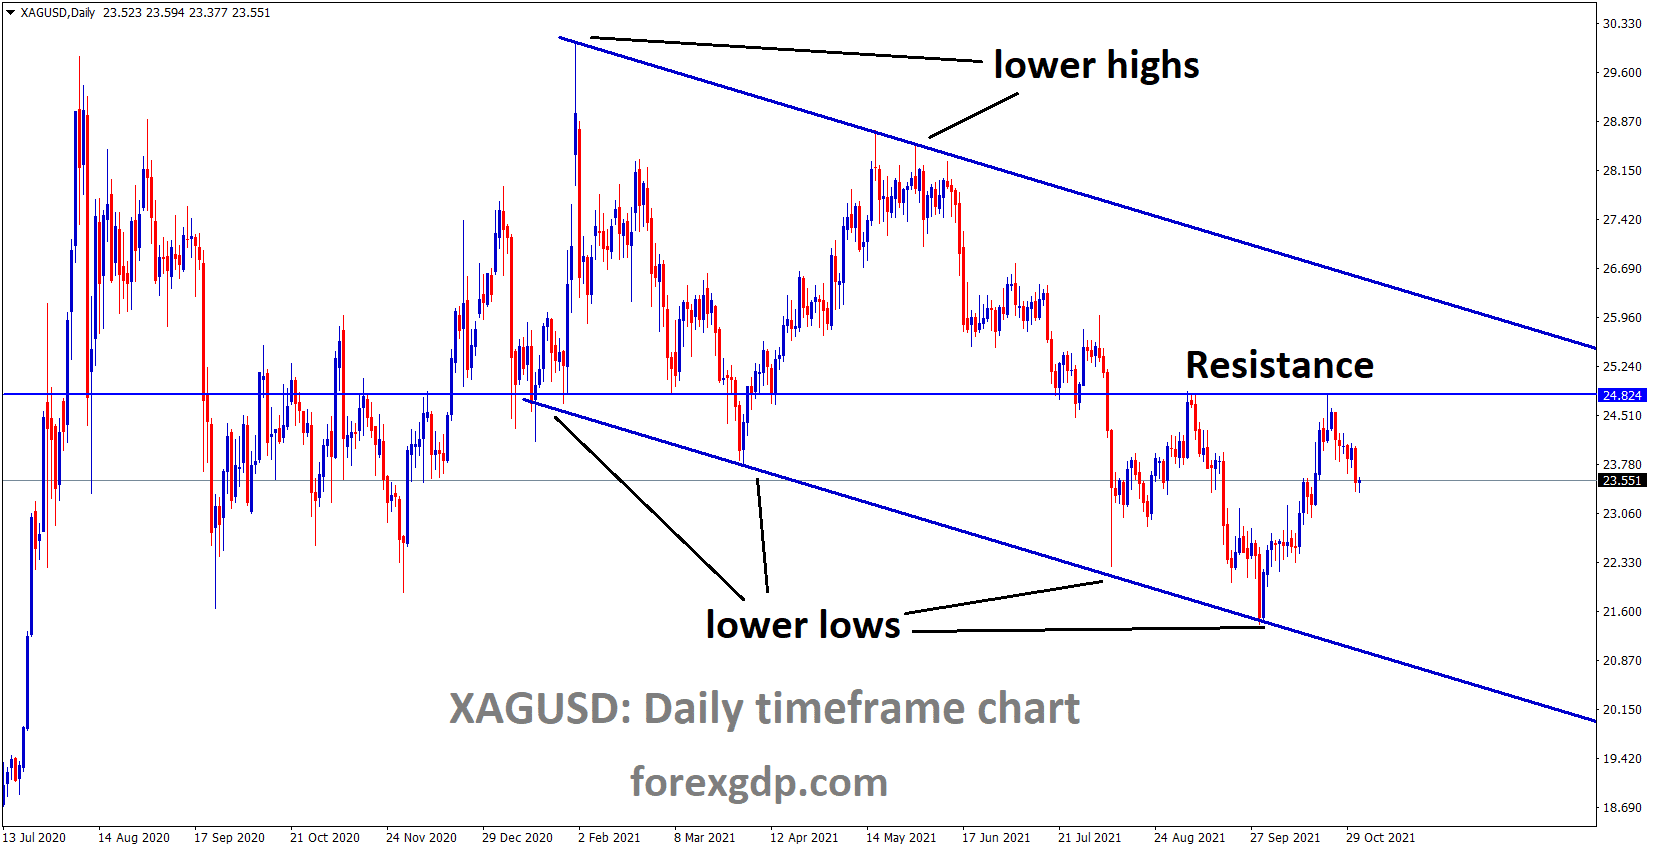 XAGUSD Silver price is moving in the Descending channel and the market is falling